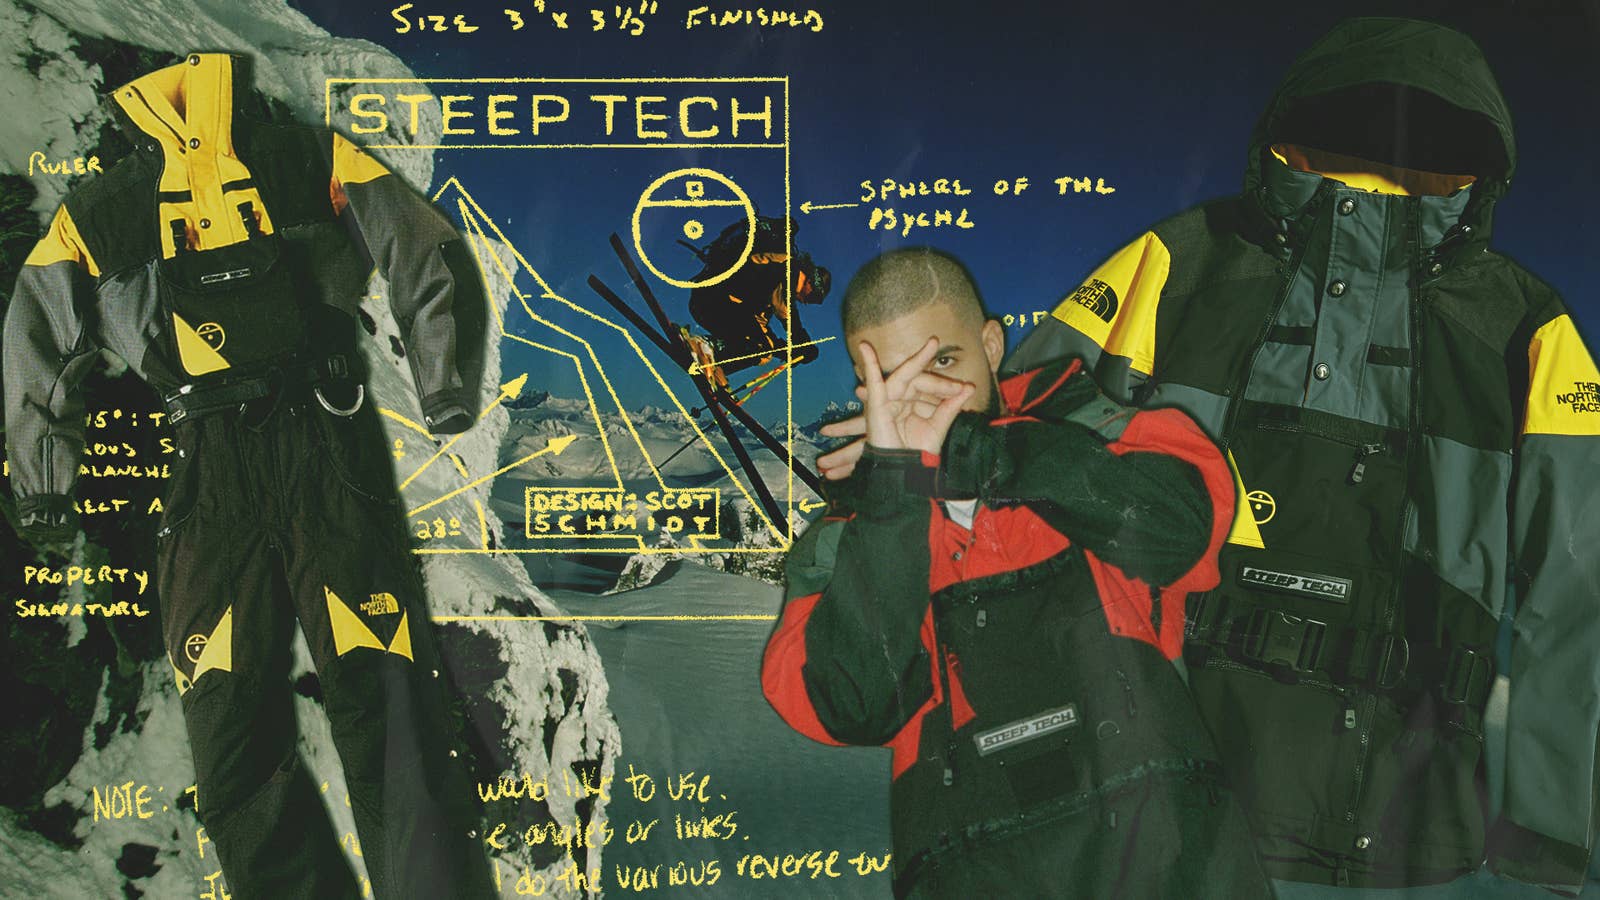 The North Face Steep Tech Collage